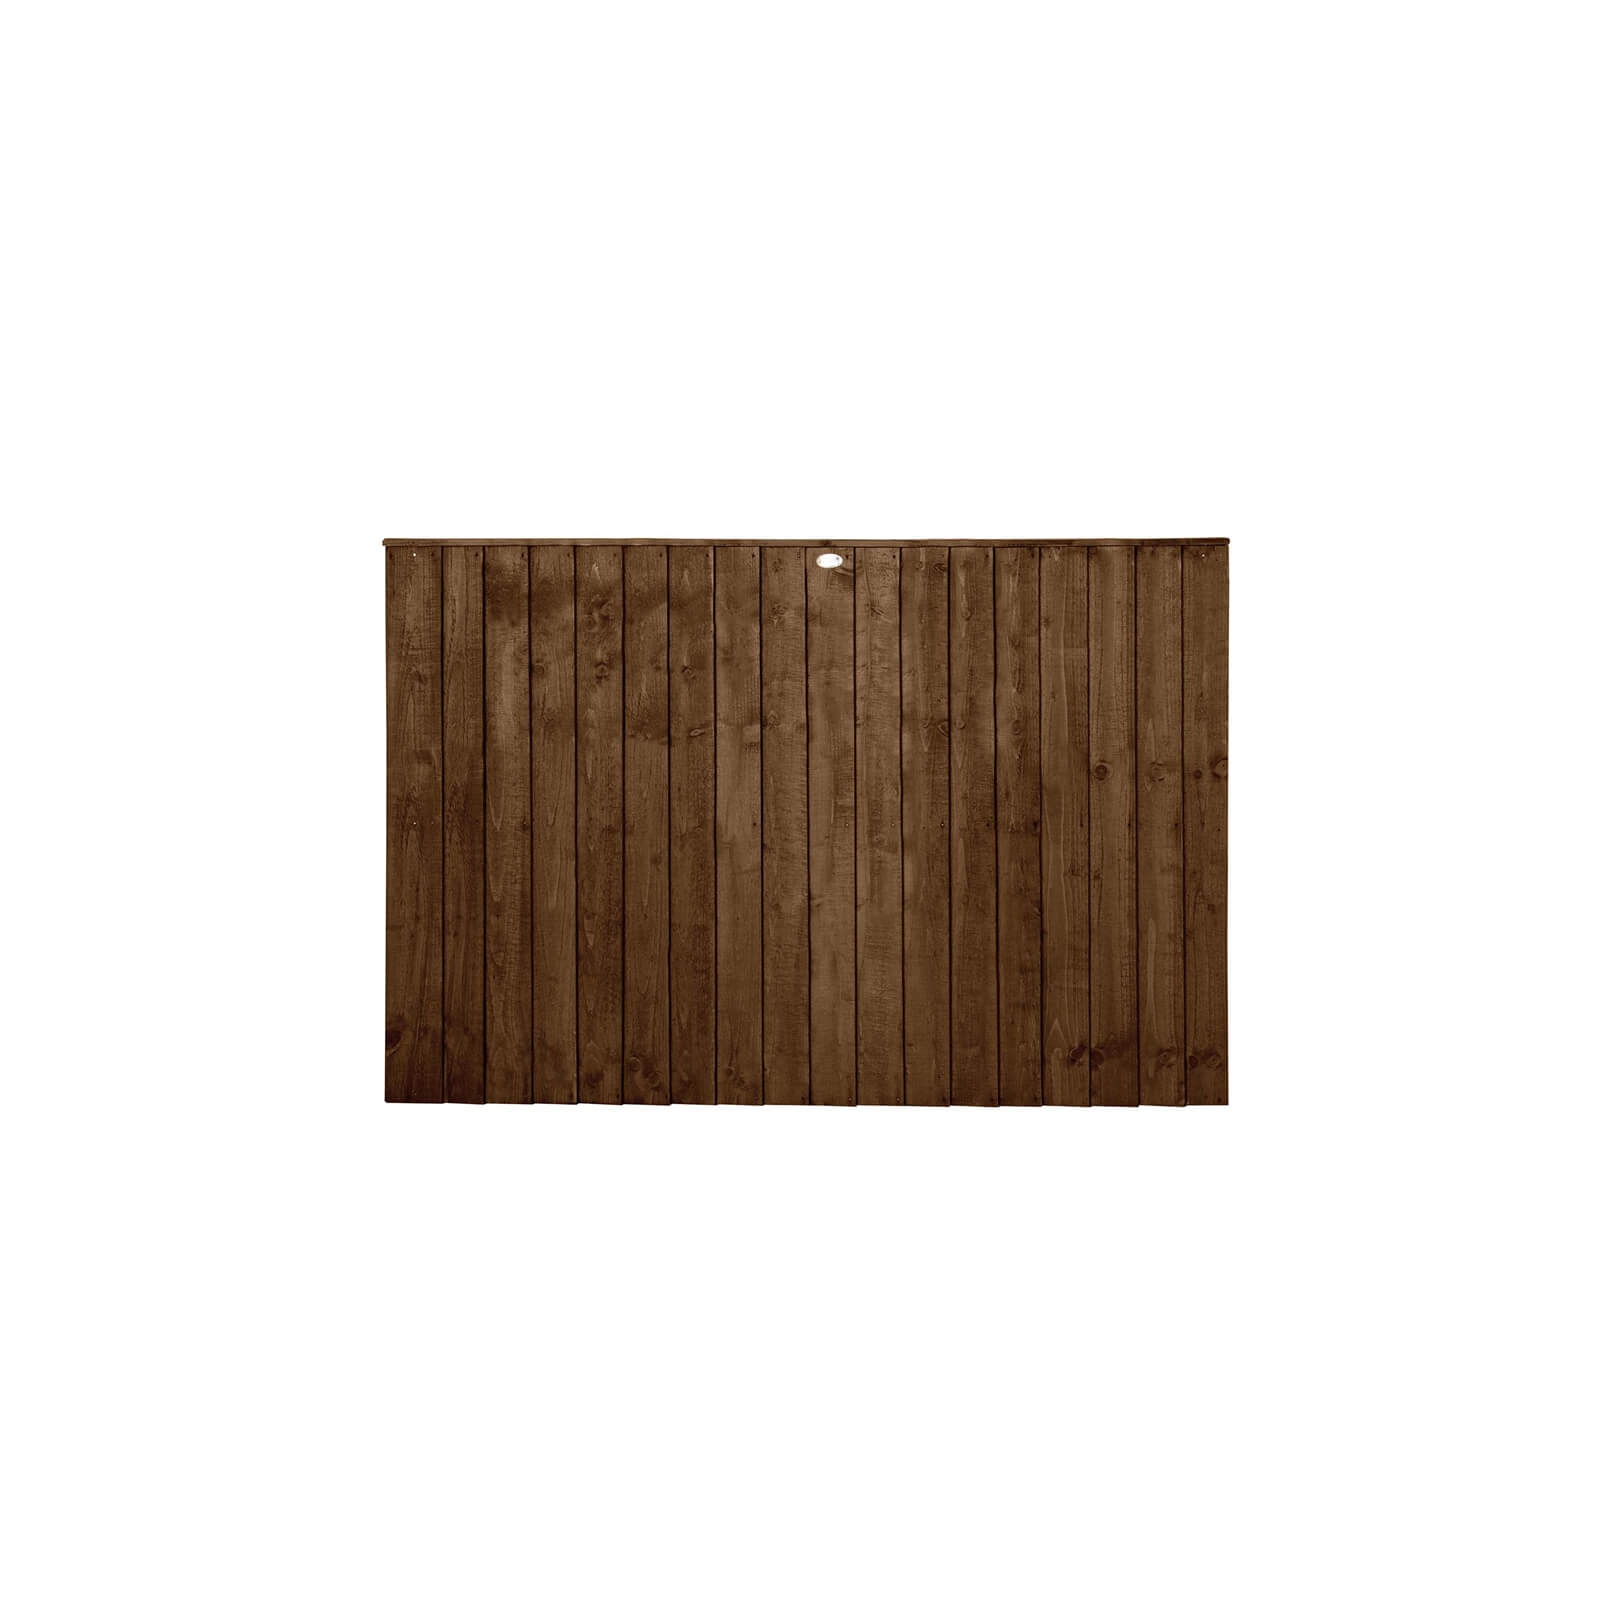 6ft x 4ft (1.83m x 1.23m) Pressure Treated Featheredge Fence Panel (Dark Brown) - Pack of 5